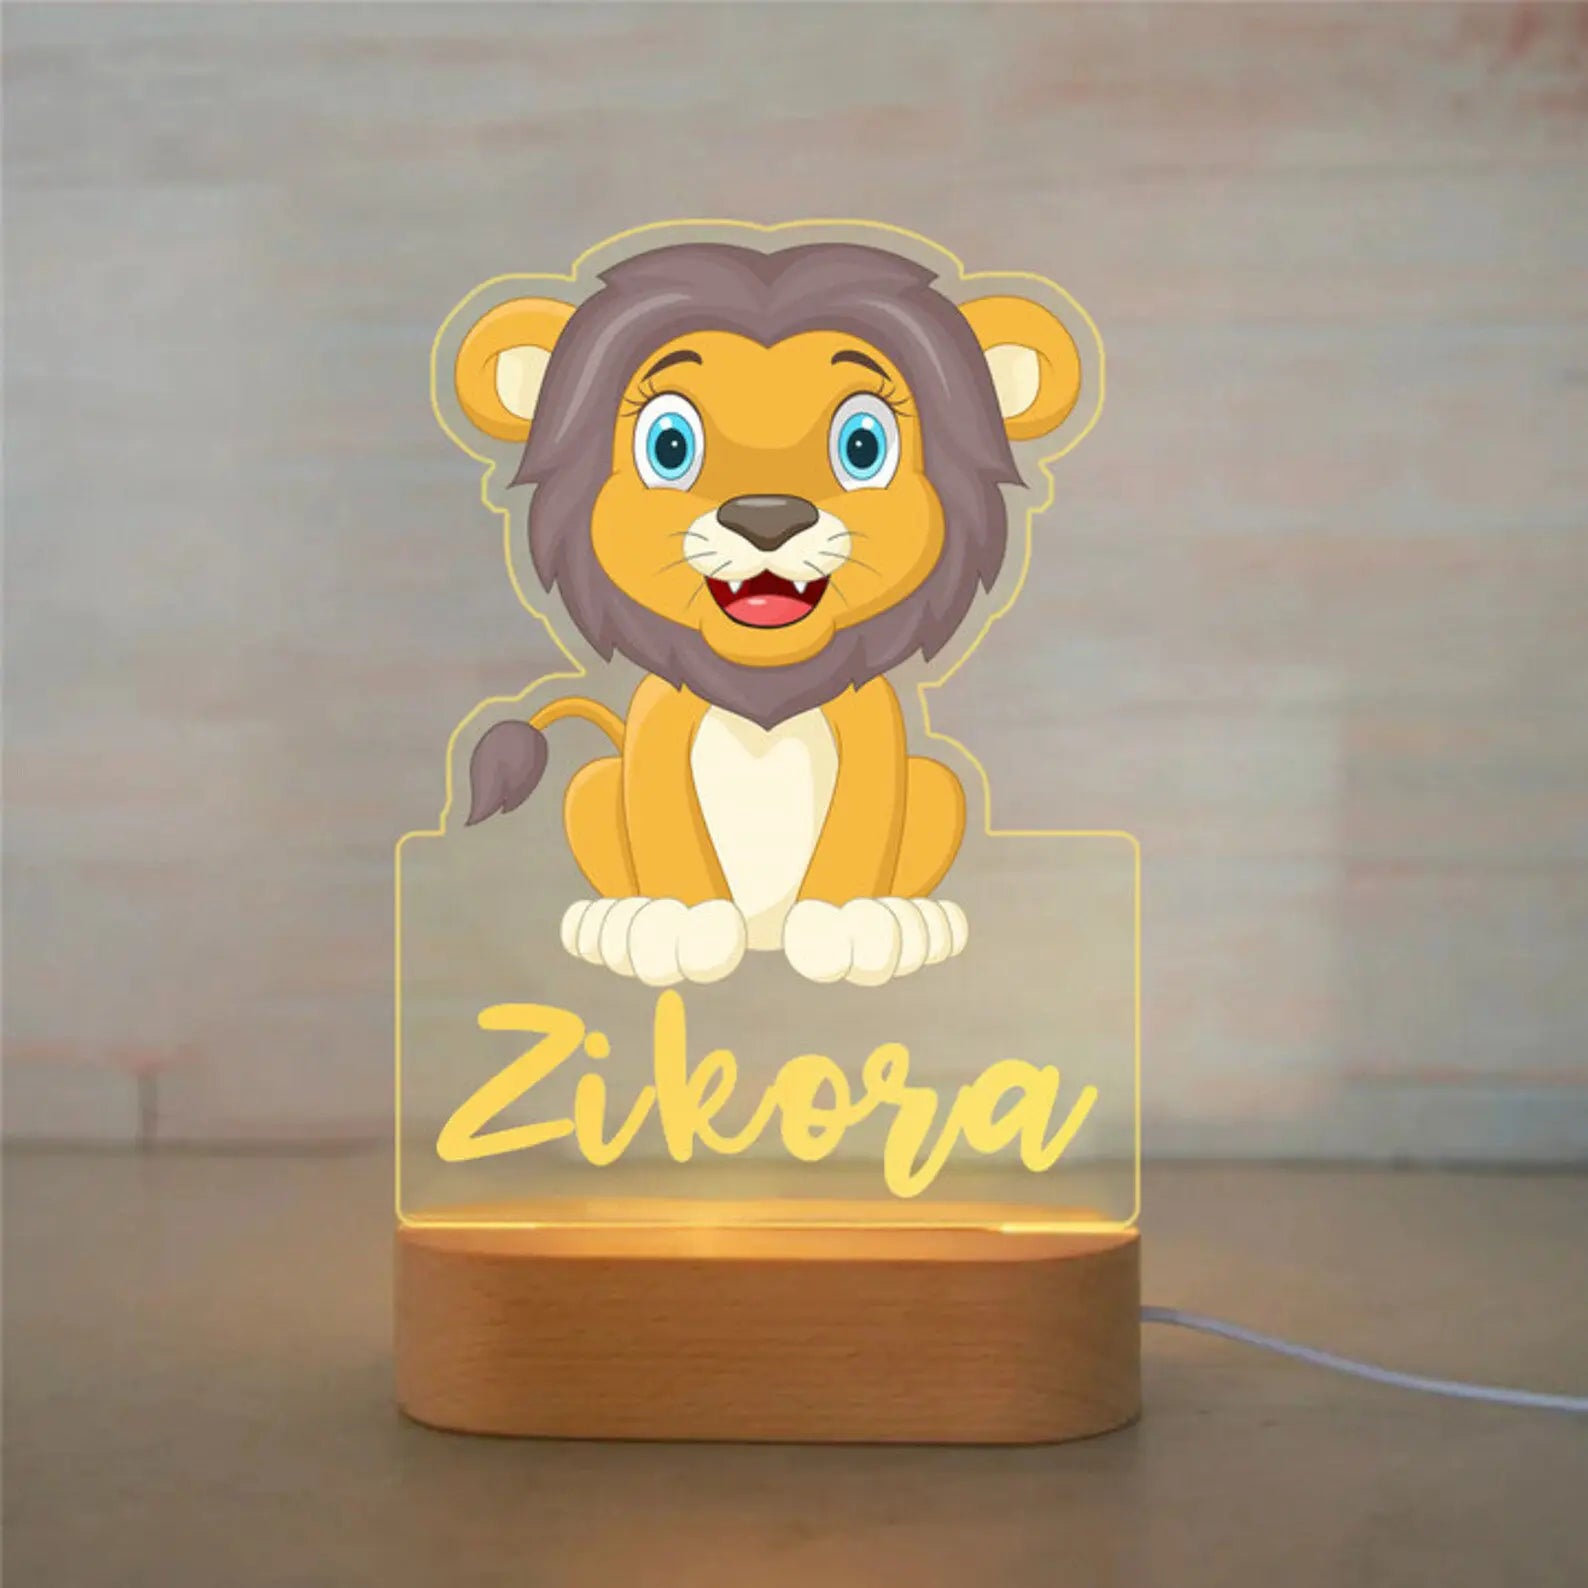 Customized Animal-themed Night Light for Kids - Personalized with Child's Name, Acrylic Lamp for Bedroom Decor Warm Light / 23Lion